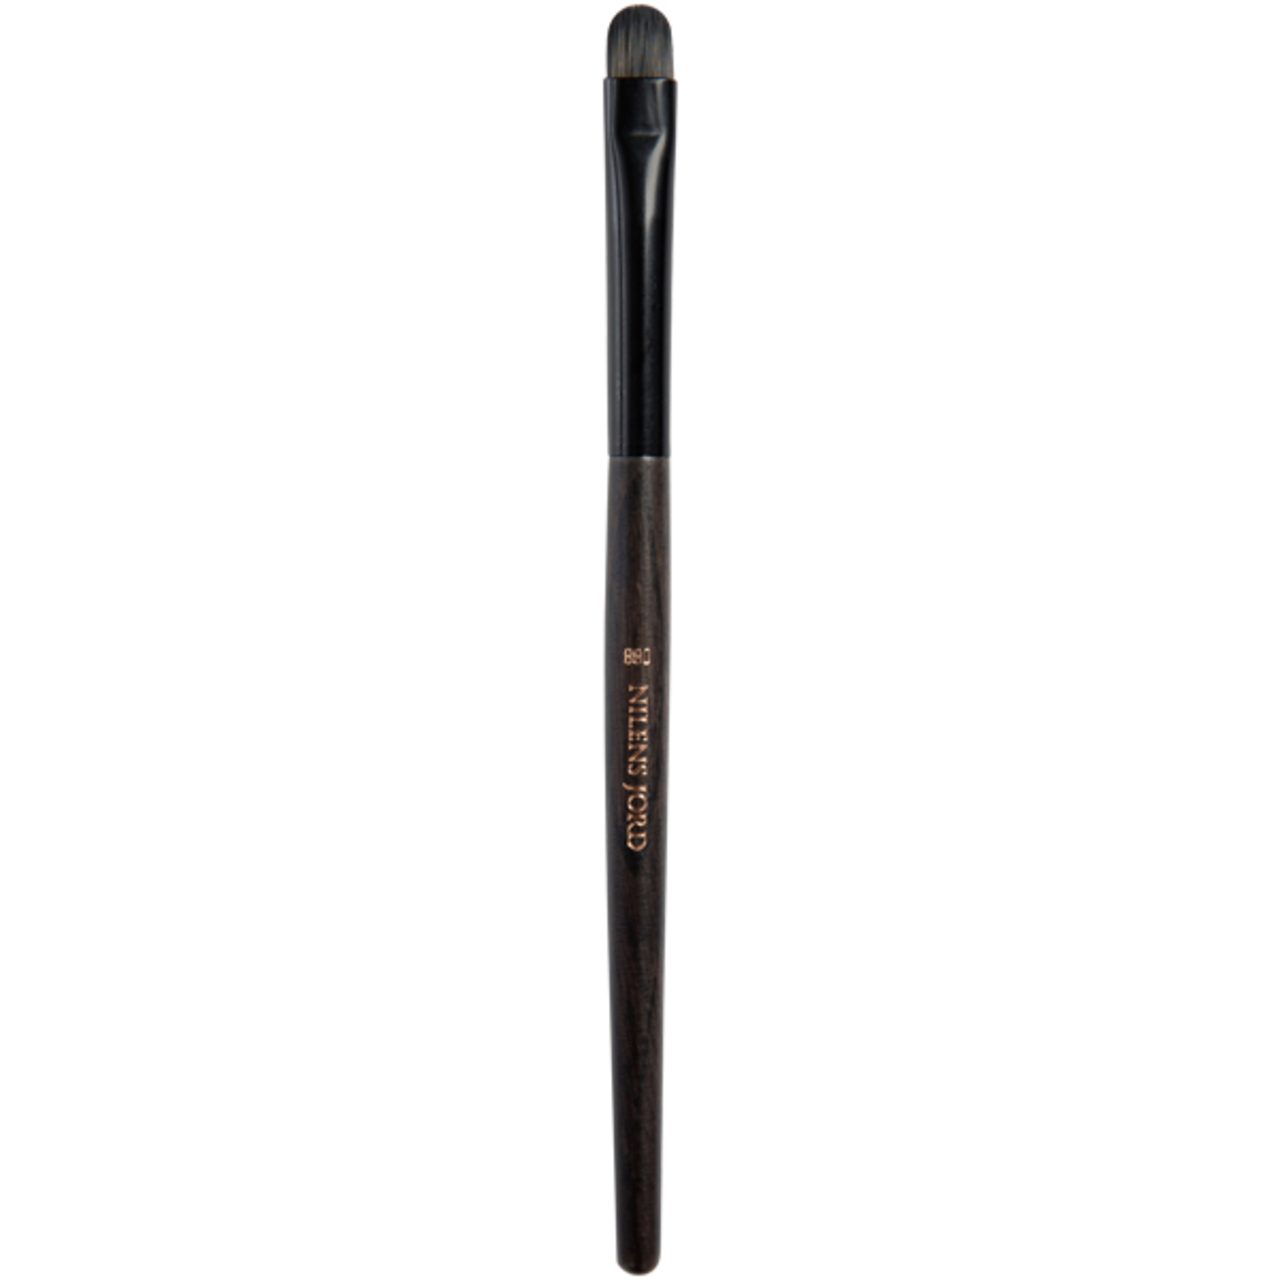 Nilens Jord Lidschattenpinsel Pure Collection Small Eye Shadow Brush